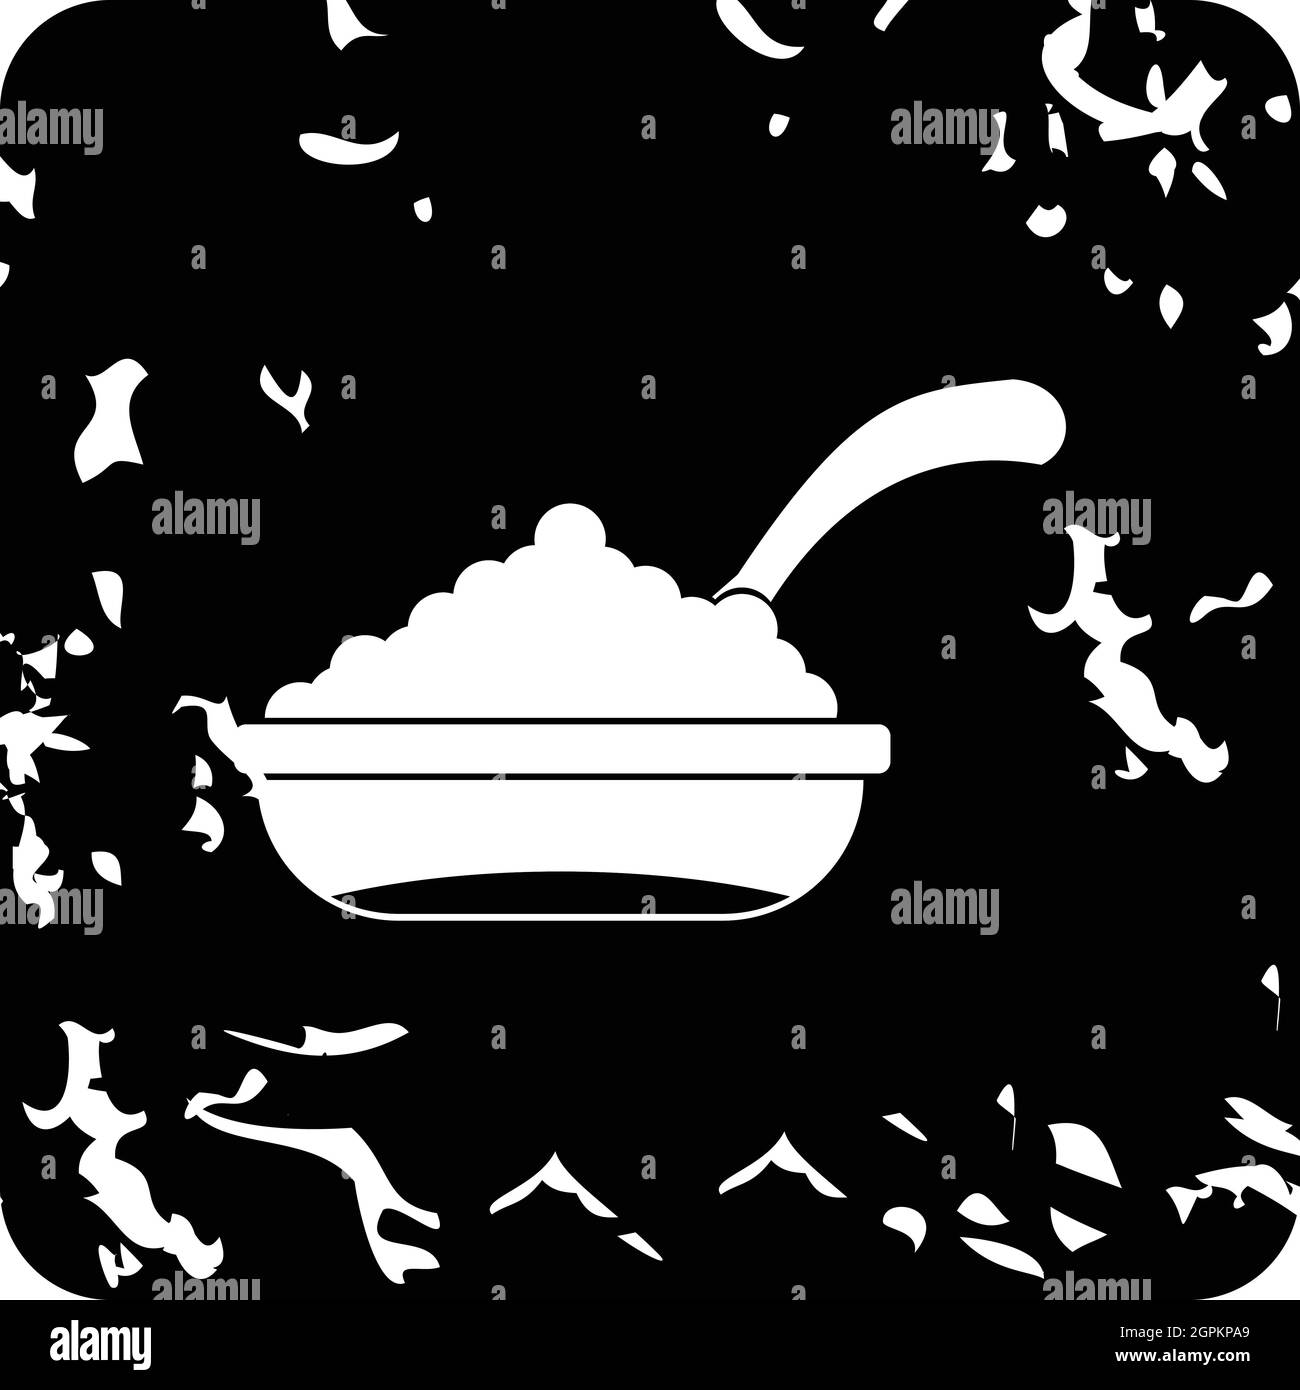 Bowl of caviar with spoon icon, grunge style Stock Vector